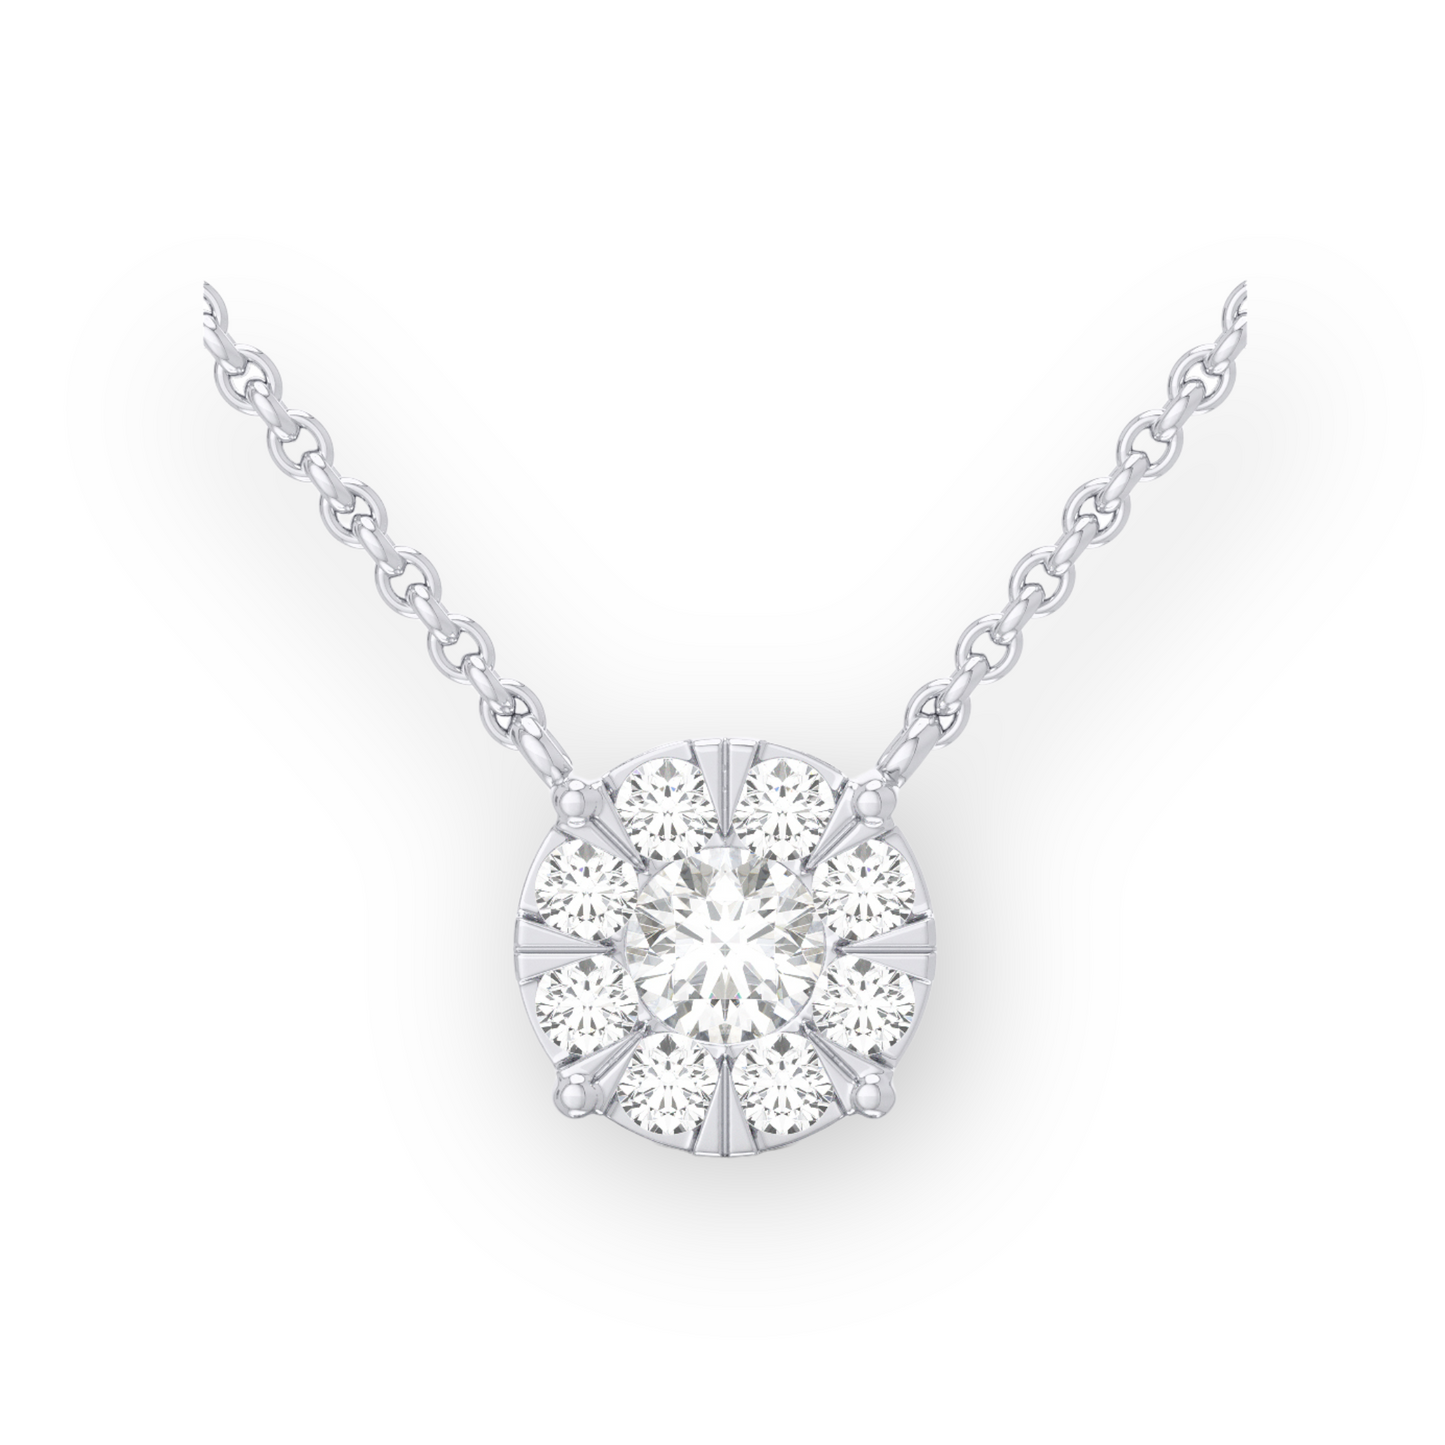 Load image into Gallery viewer, Cluster Diamond Necklace need description
